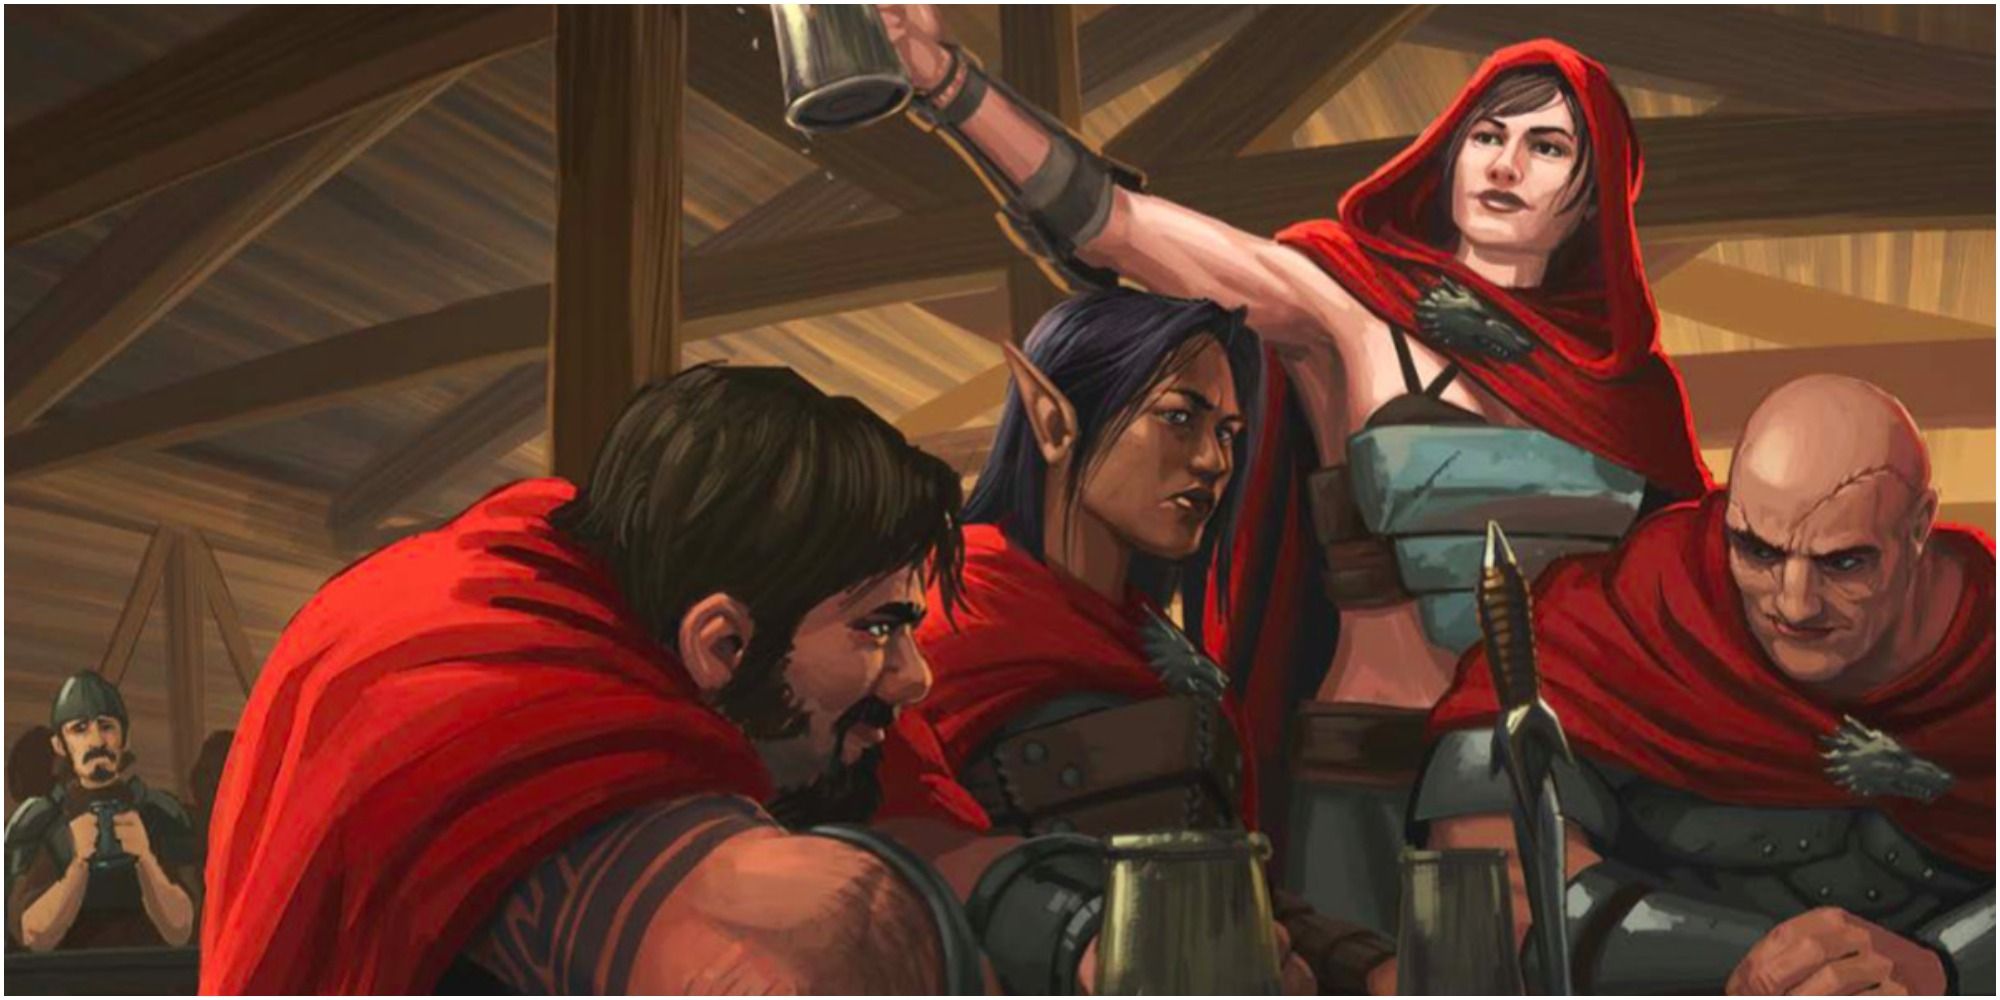 art from the dragon age ttrpg